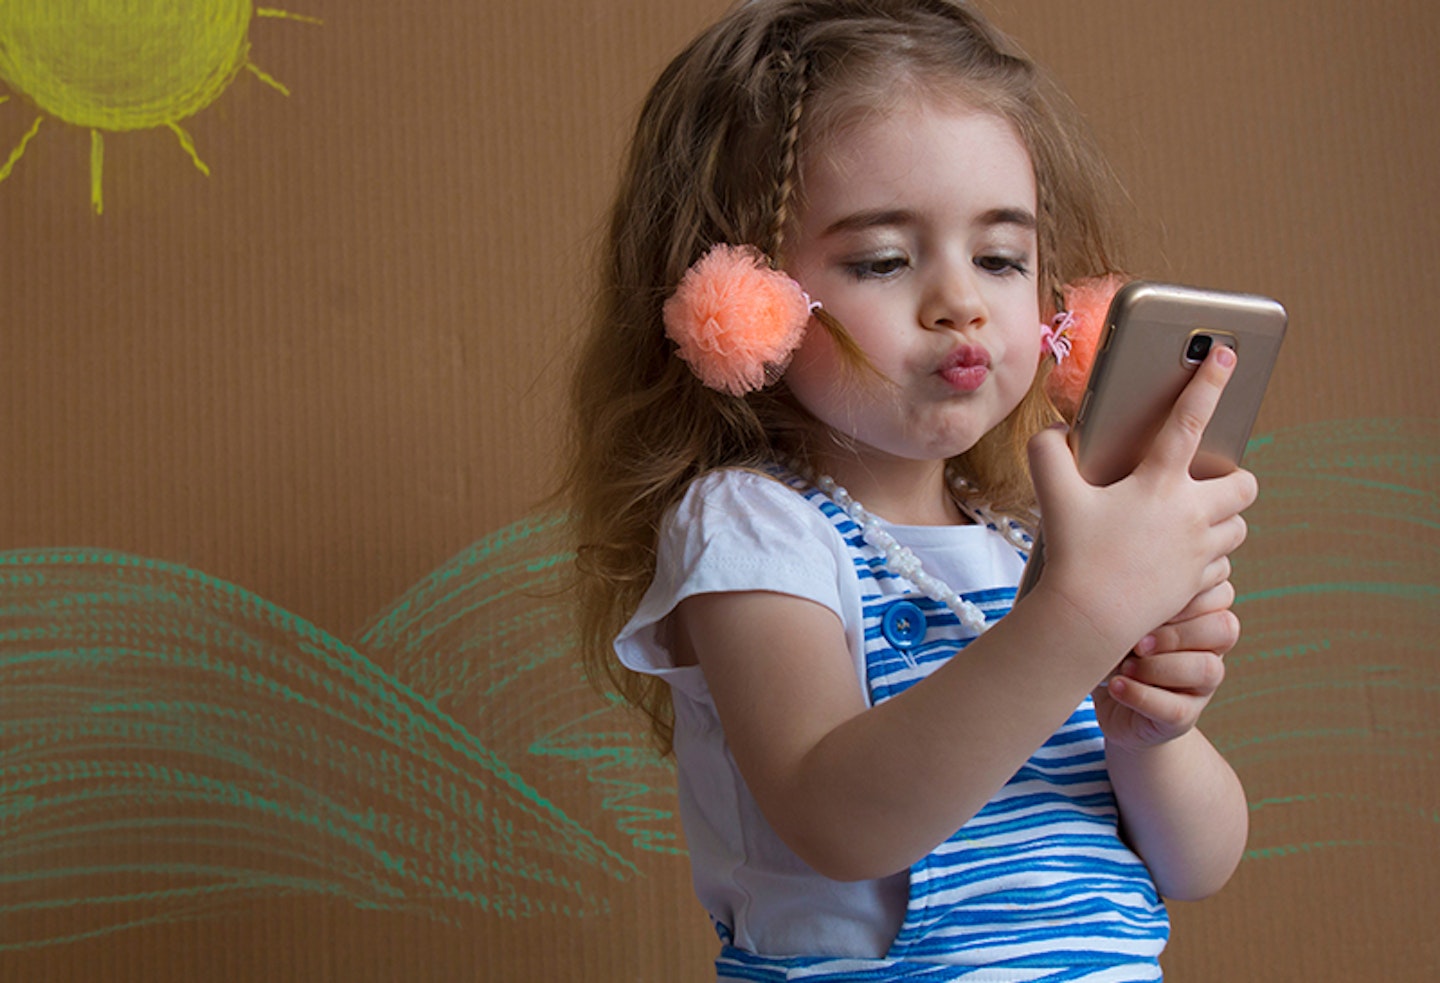 9 important tips for keeping your little ones safe on Instagram